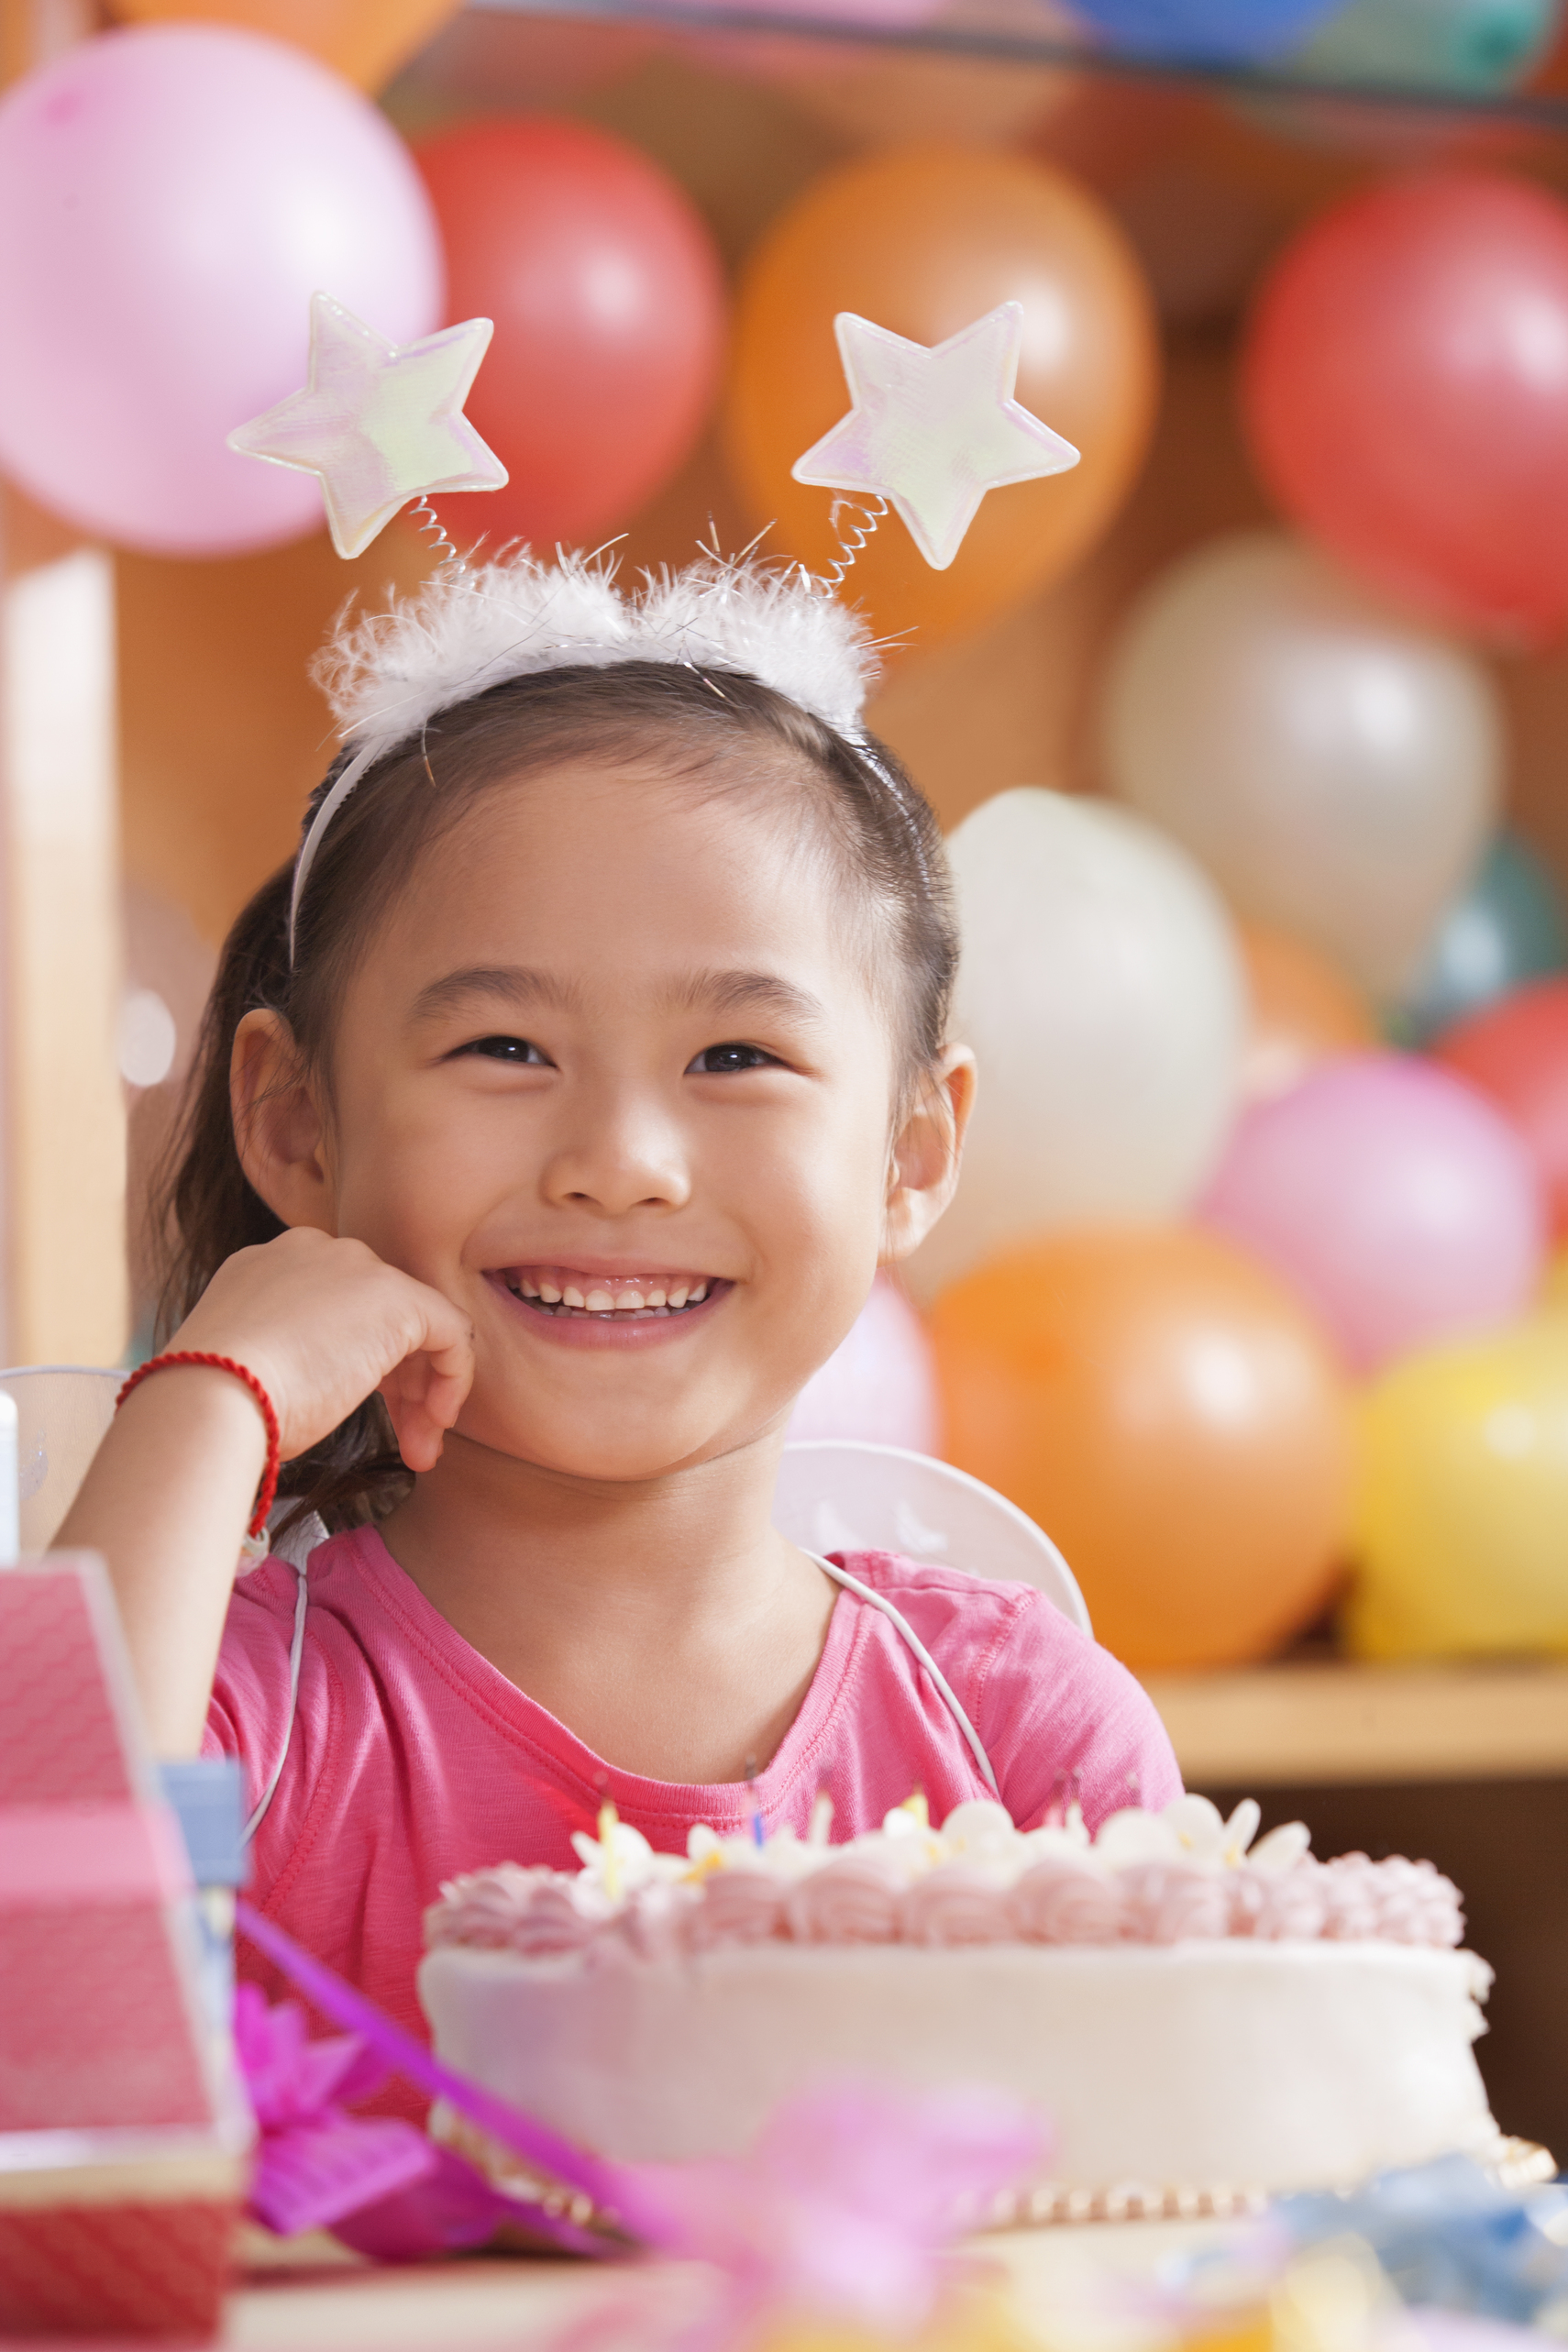 Simple and Fun Kids' Birthday Party Ideas At Home   MomsWhoSave.com